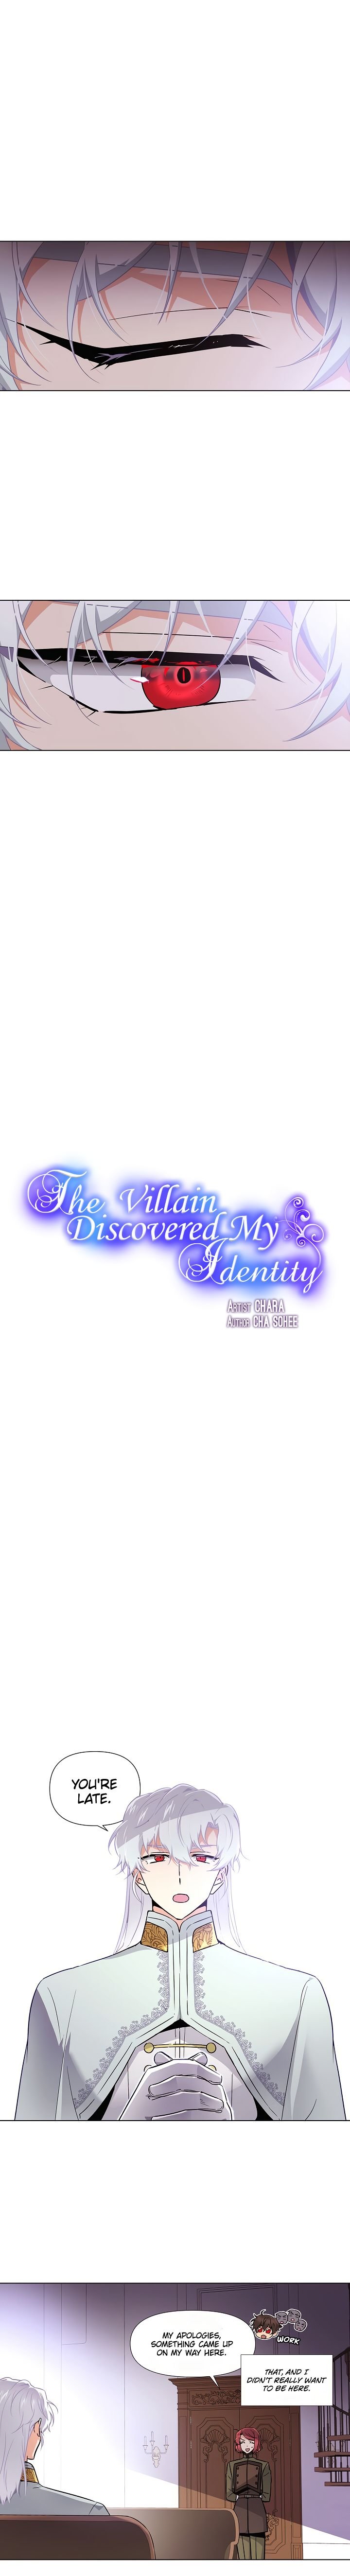 The Villain Discovered My Identity Chapter 21 - Page 2